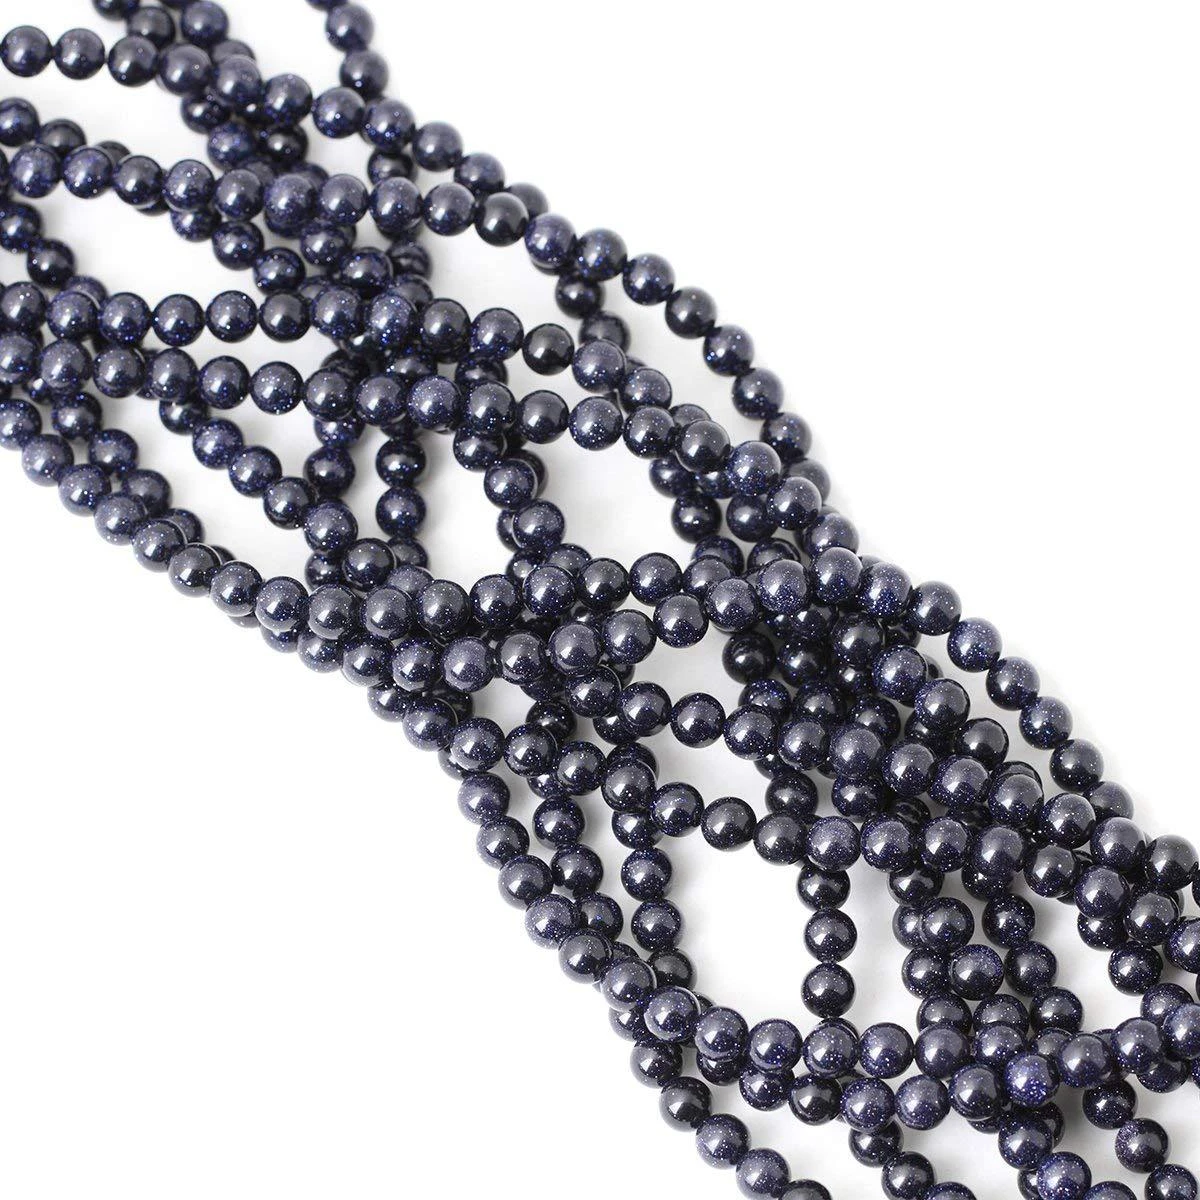 Wholesales Blue Blue Goldstone Round Loose Beads Gemstone Healing Crystal Beads for Jewelry Making